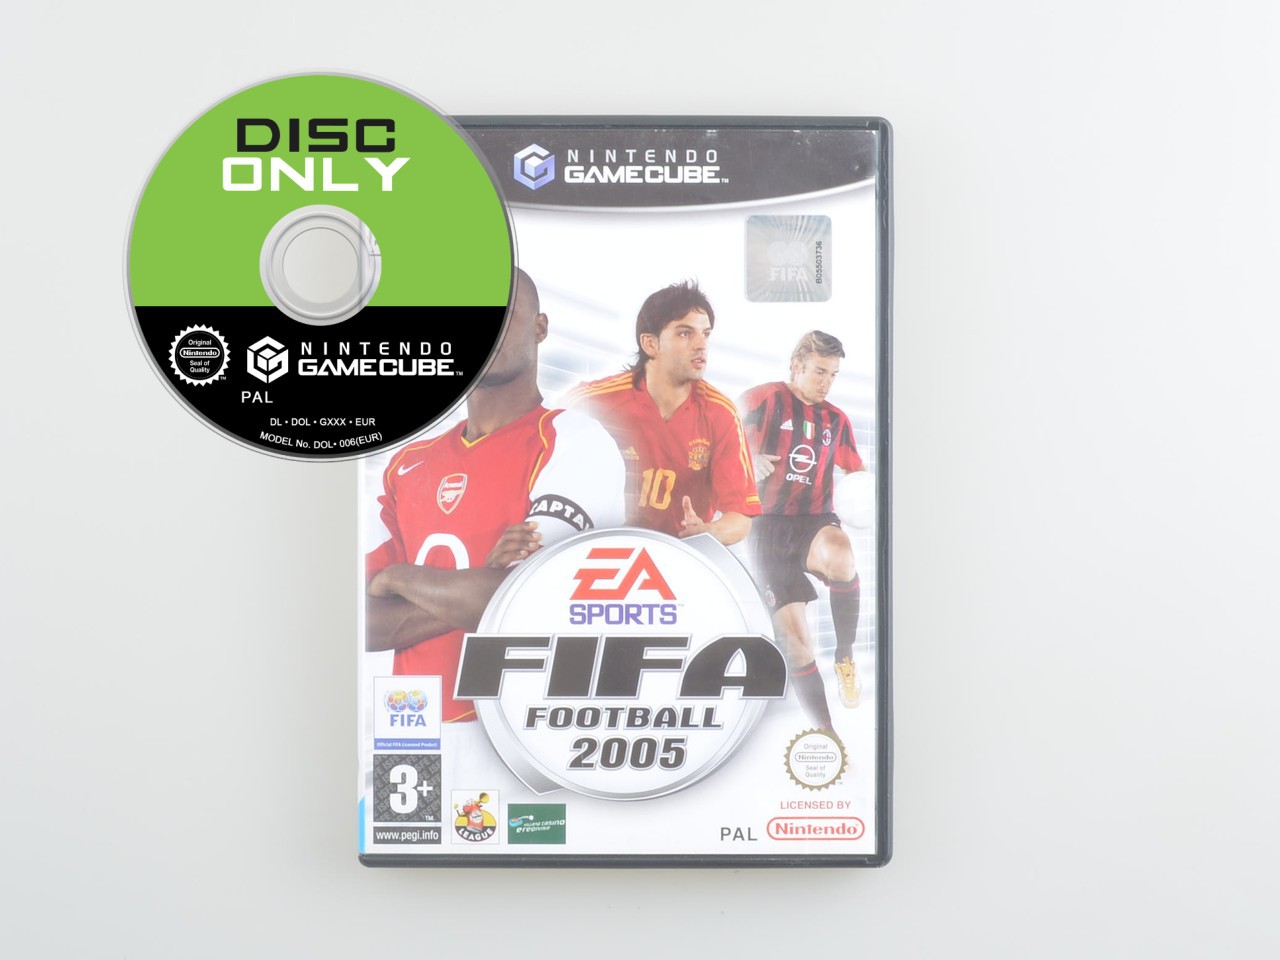 FIFA Football 2005 - Disc Only - Gamecube Games